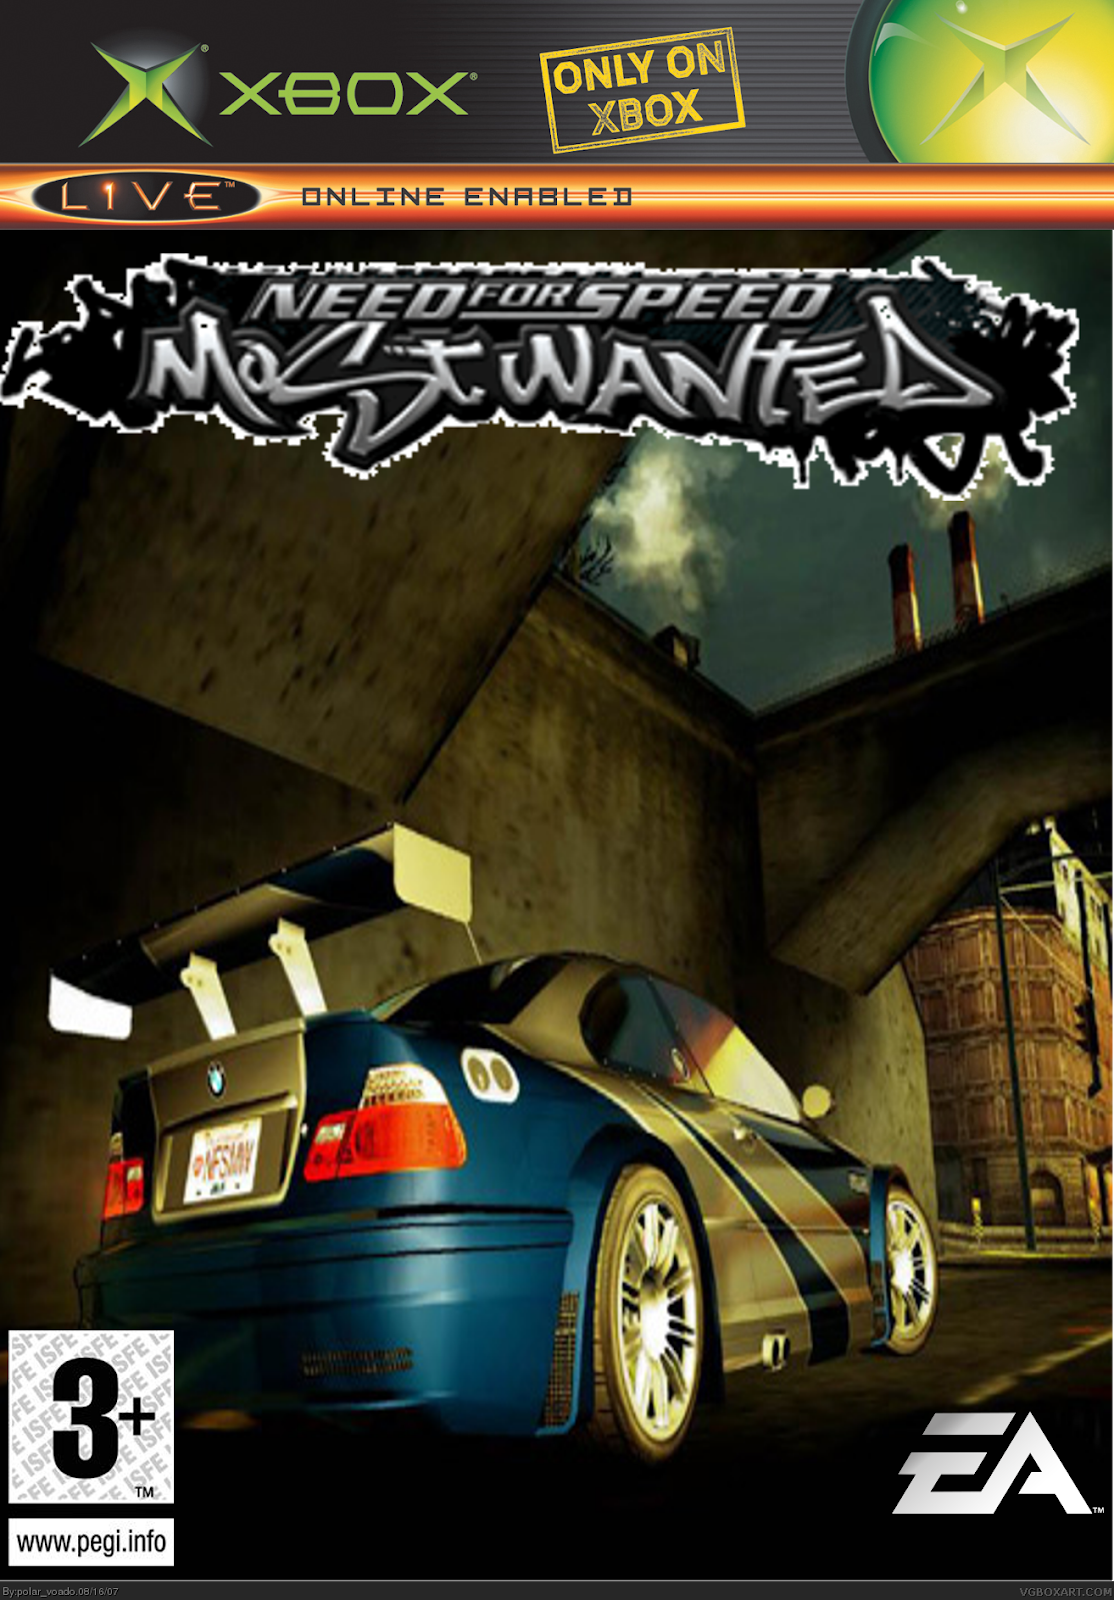 NFS most wanted диск Xbox 360. Need for Speed most wanted 2005 Xbox 360. NFS most wanted 2005 Xbox Store. Need for Speed: most wanted 2005 для Xbox. Nfs most wanted xbox